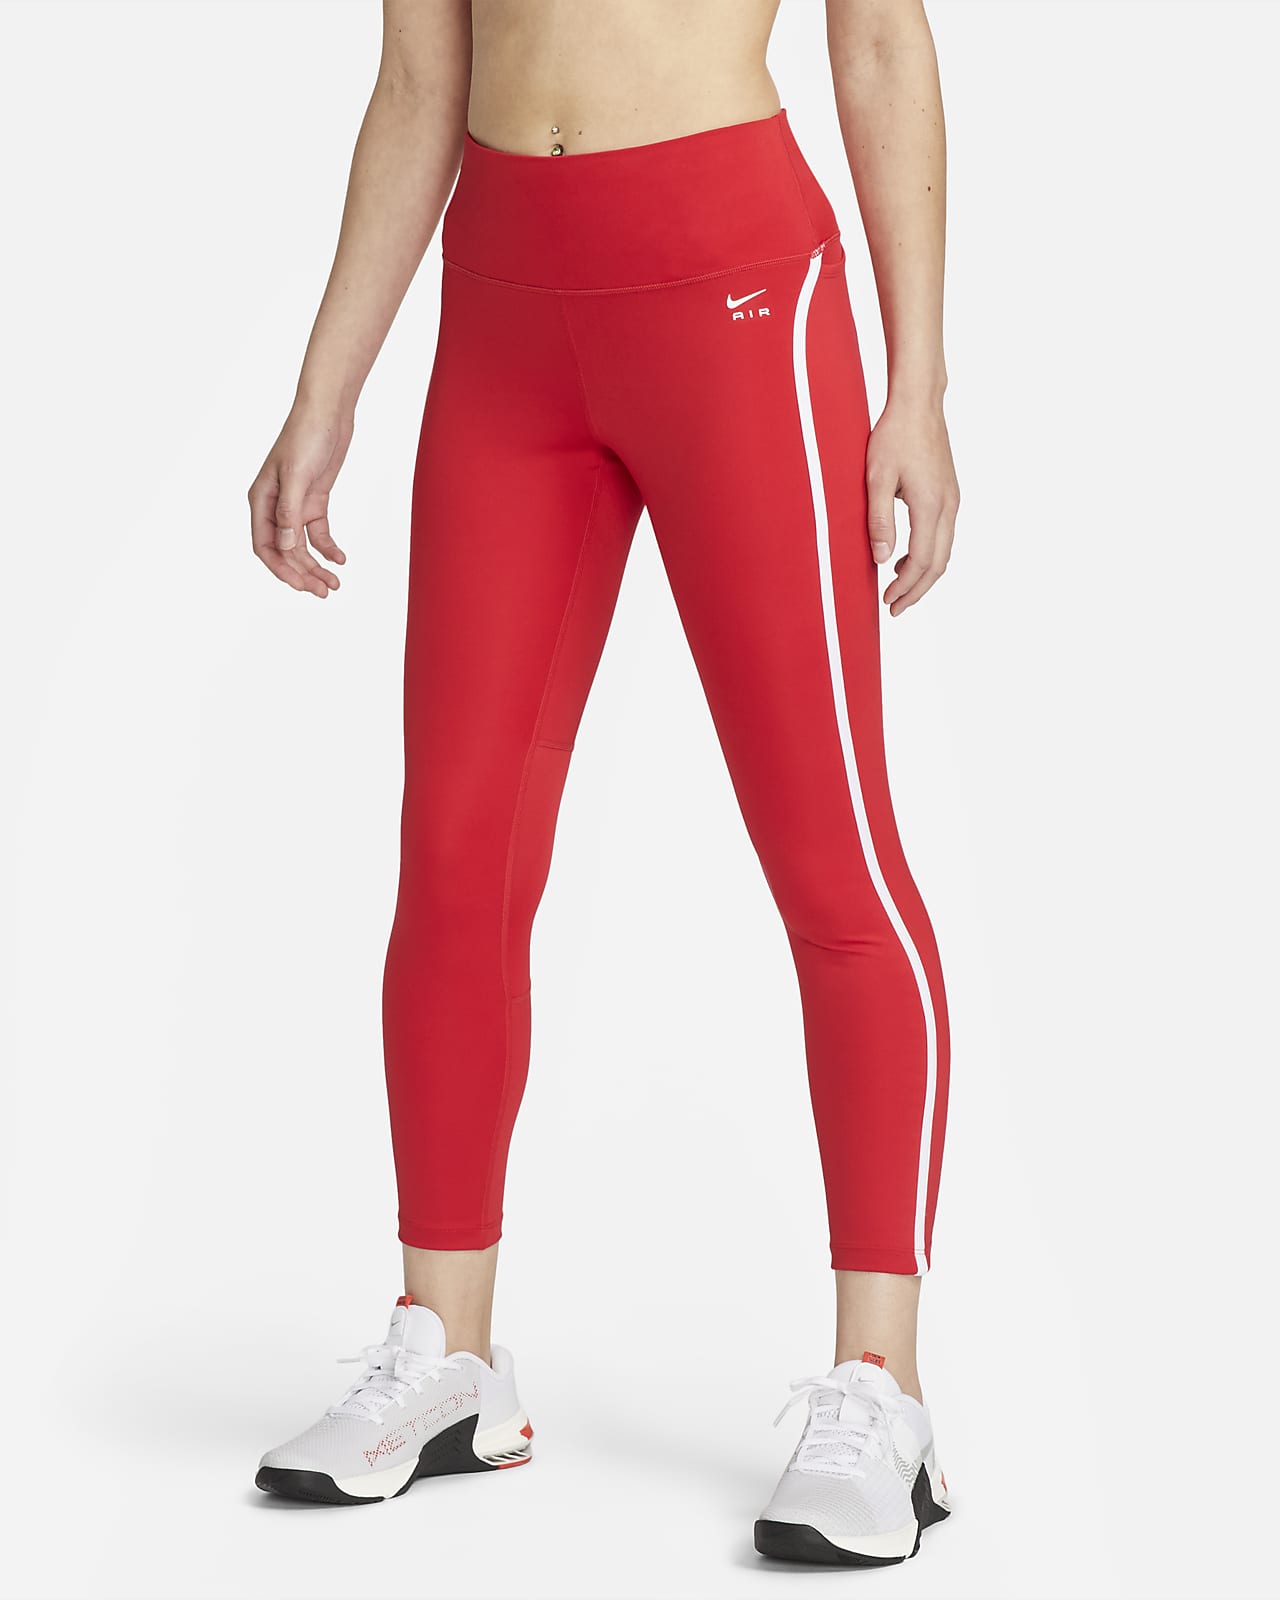 Nike Pro 365 Leggings Pomegranate The Nike Pro Leggings are made with  sweat-wicking fabric that and mesh across the calves to keep you cool and  dry. Soft, stretchy fabric moves with you